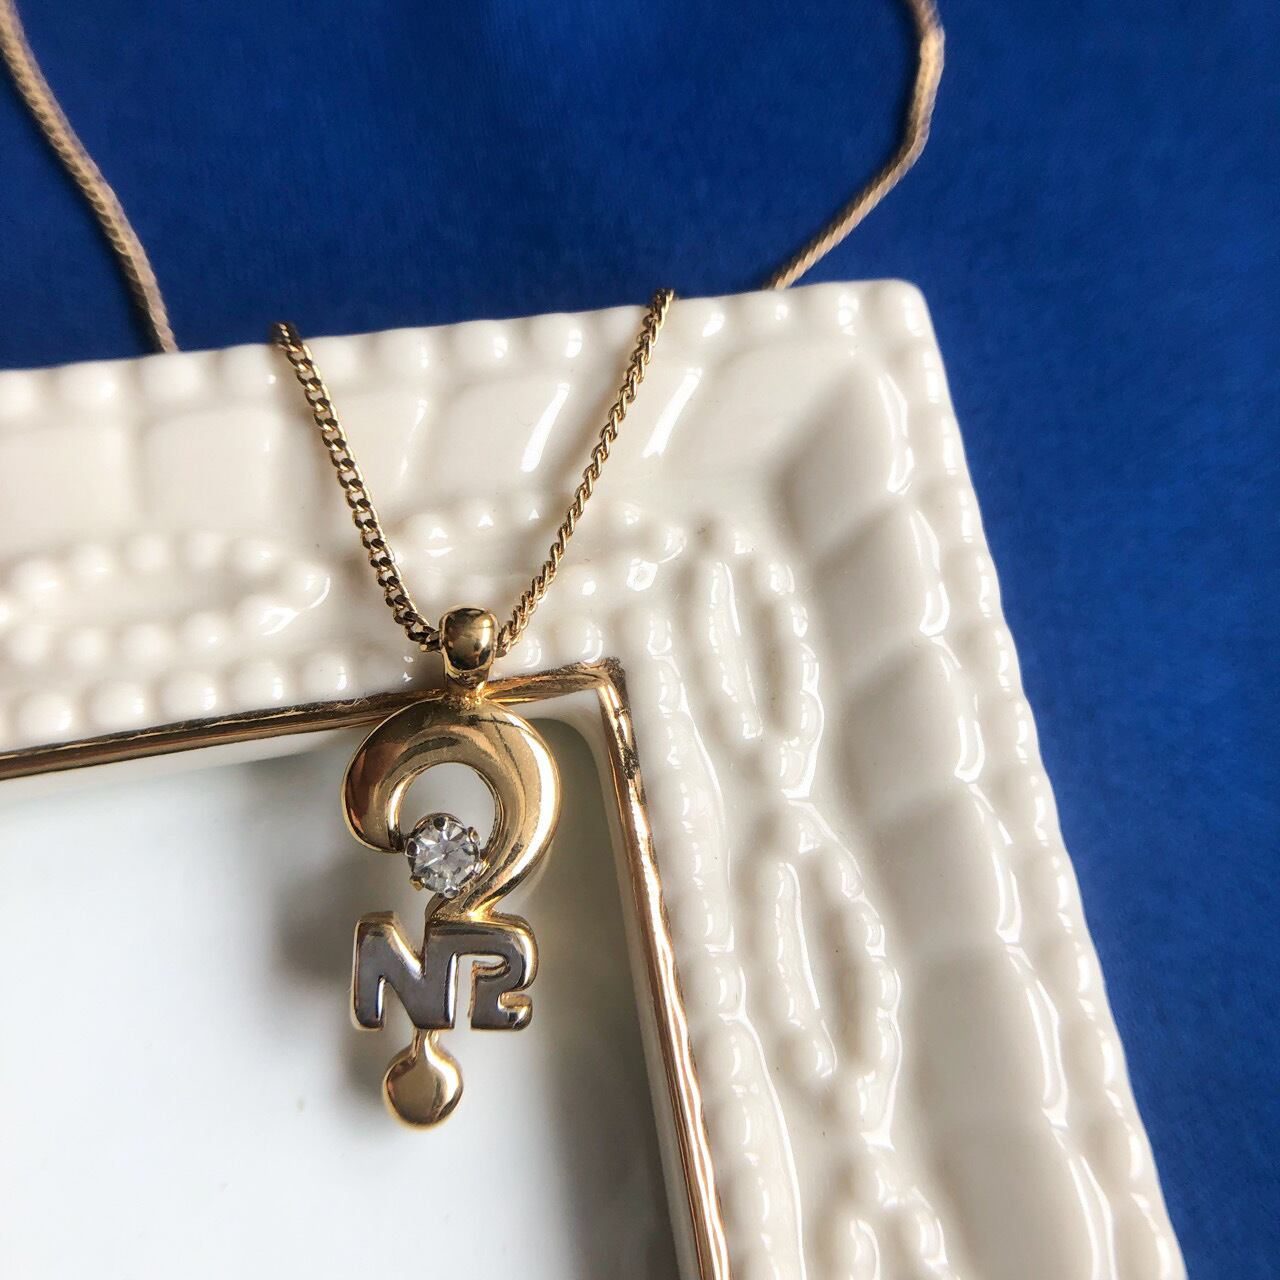 “NINA RICCI” question necklace[n-348]ヴィンテージネックレス